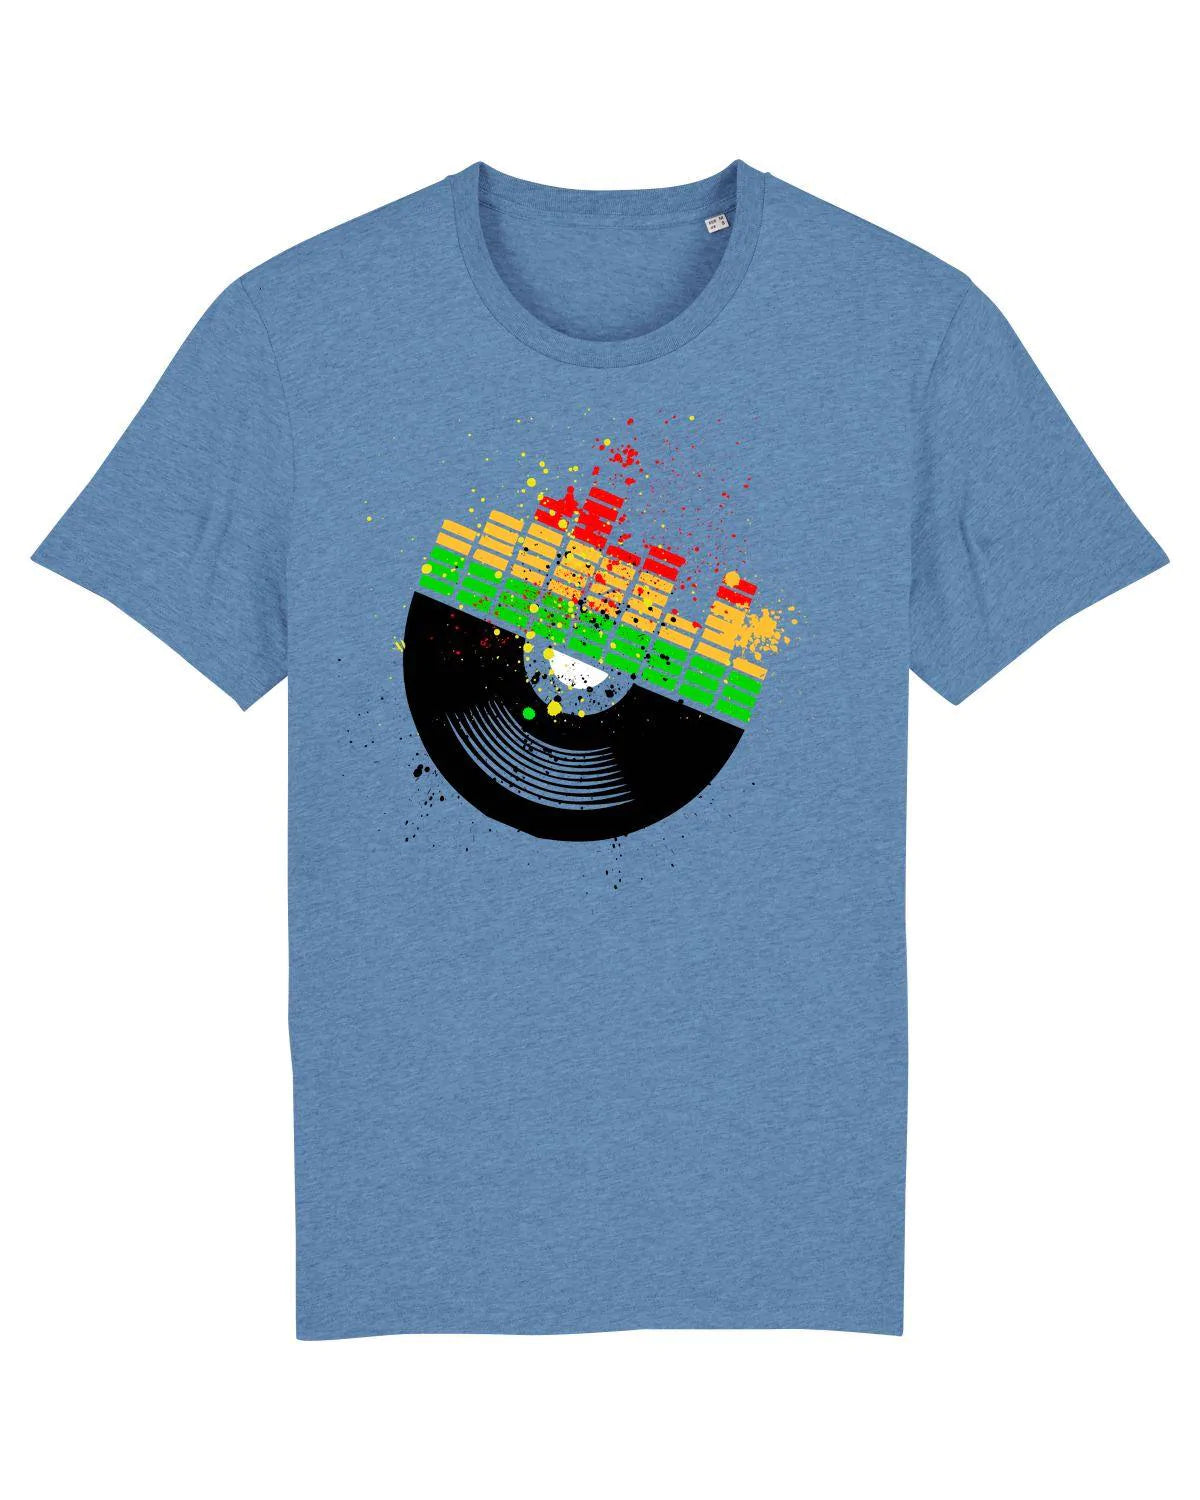 PUMP UP THE VOLUMN: T-Shirt Inspired by DJs and Clubbing (3 Colours) - SOUND IS COLOUR